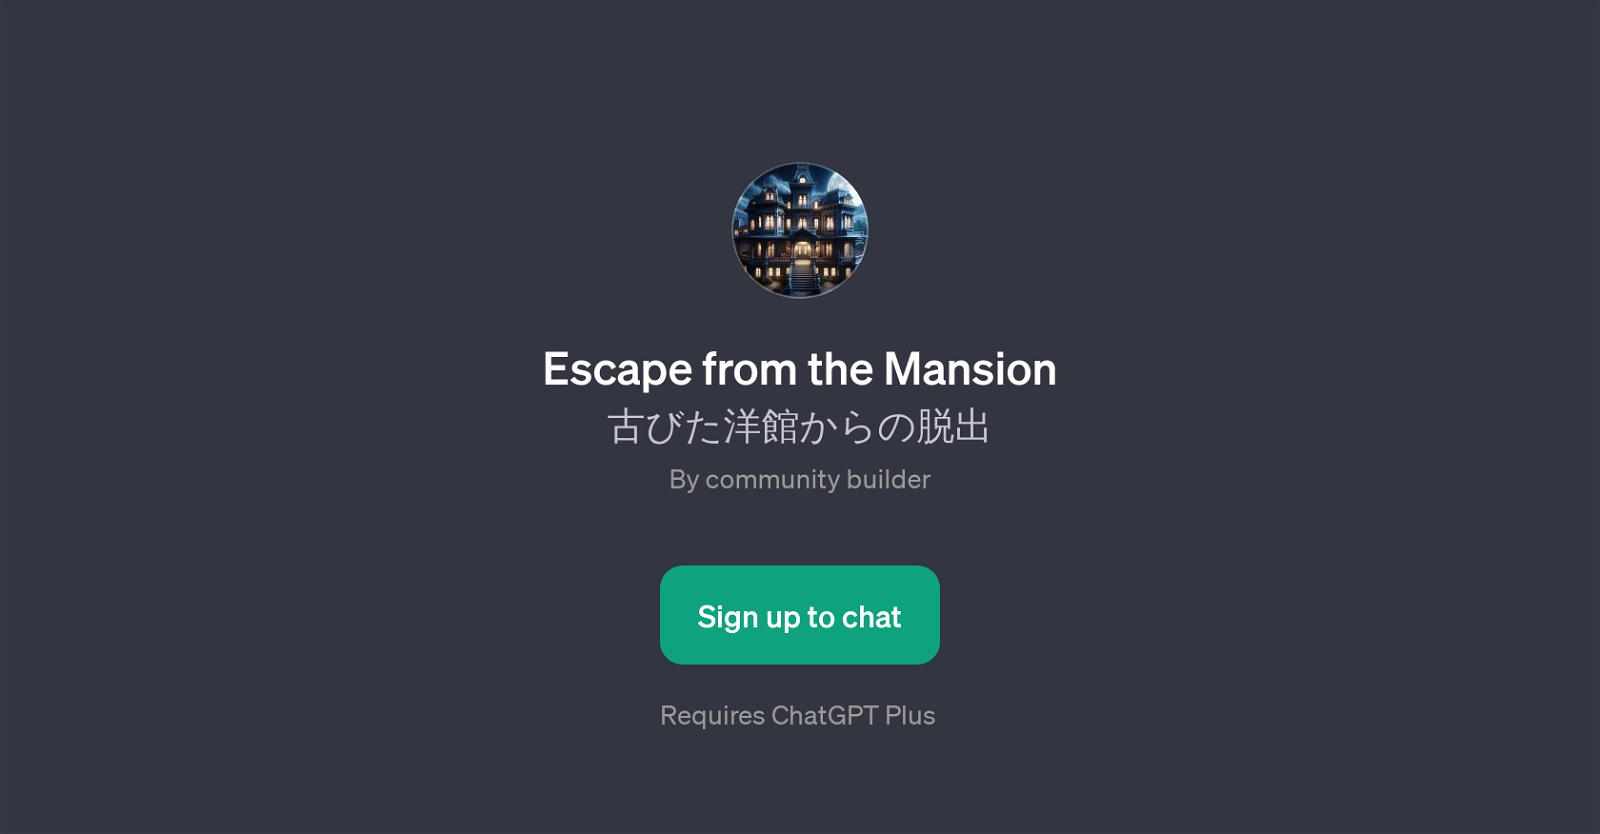 Escape from the Mansion website